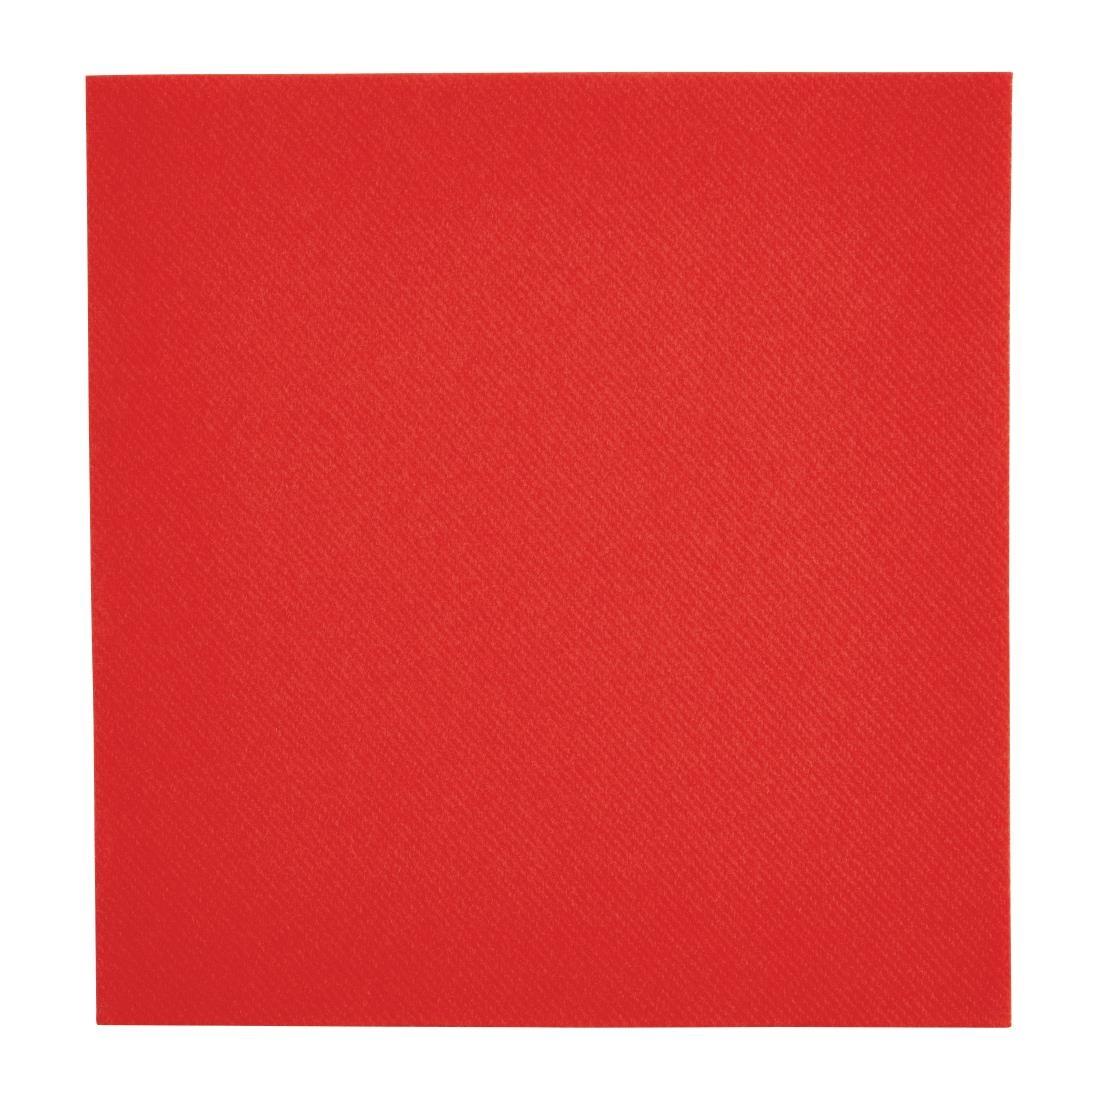 Fiesta Recyclable Premium Tablin Dinner Napkin Red 40x40cm Airlaid 1/4 Fold (Pack of 500) - FE267  - 1